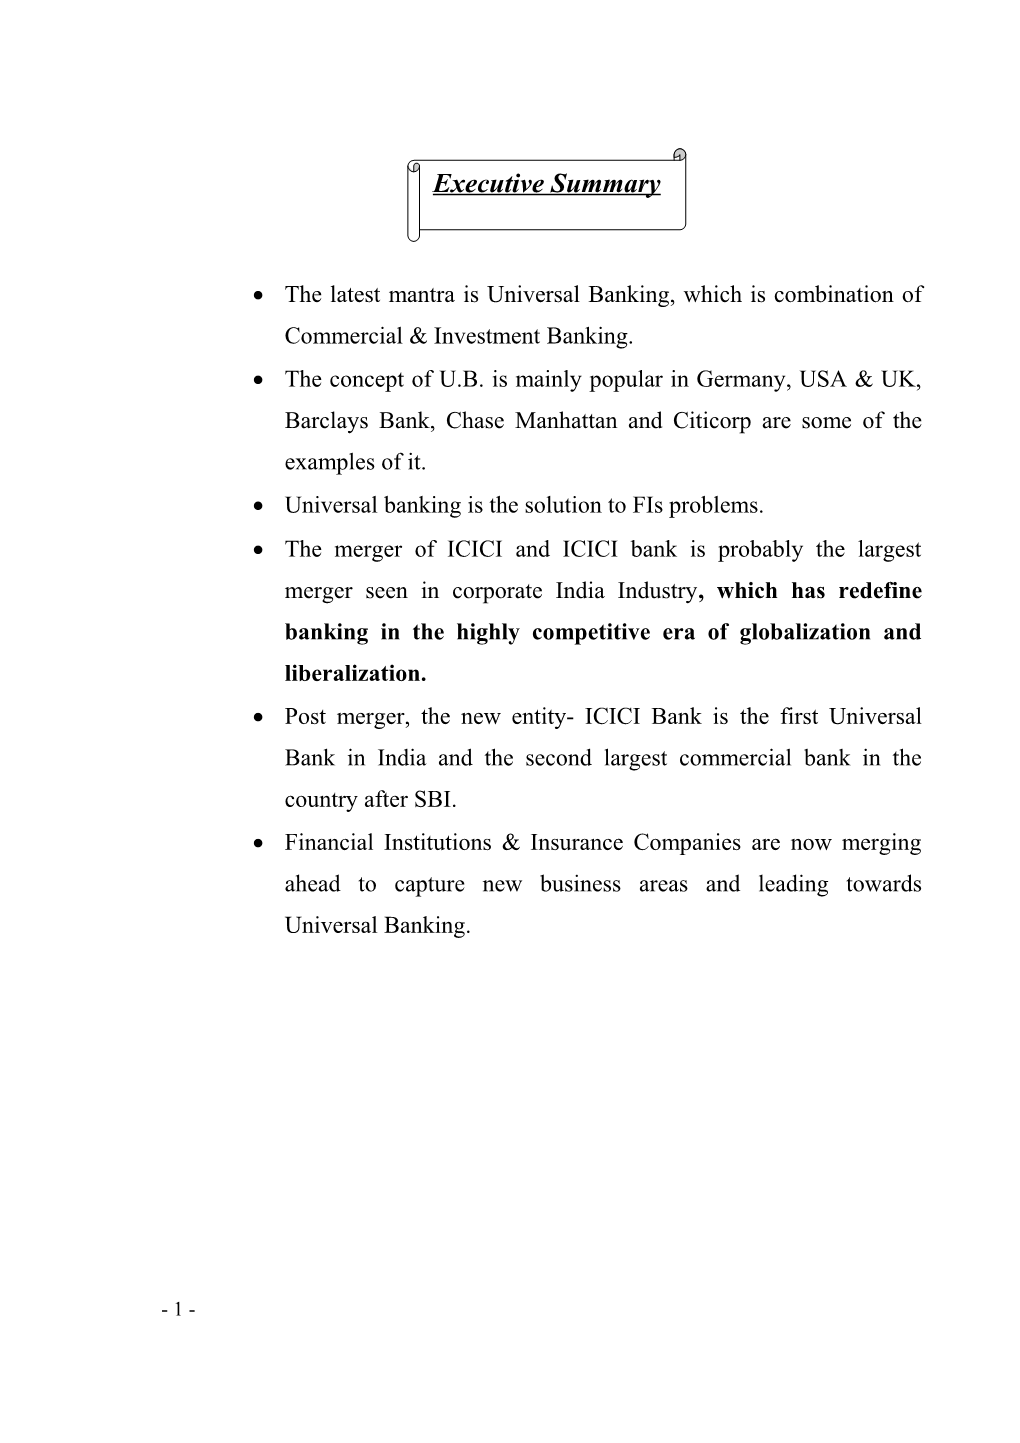 The Latest Mantra Is Universal Banking, Which Is Combination of Commercial & Investment